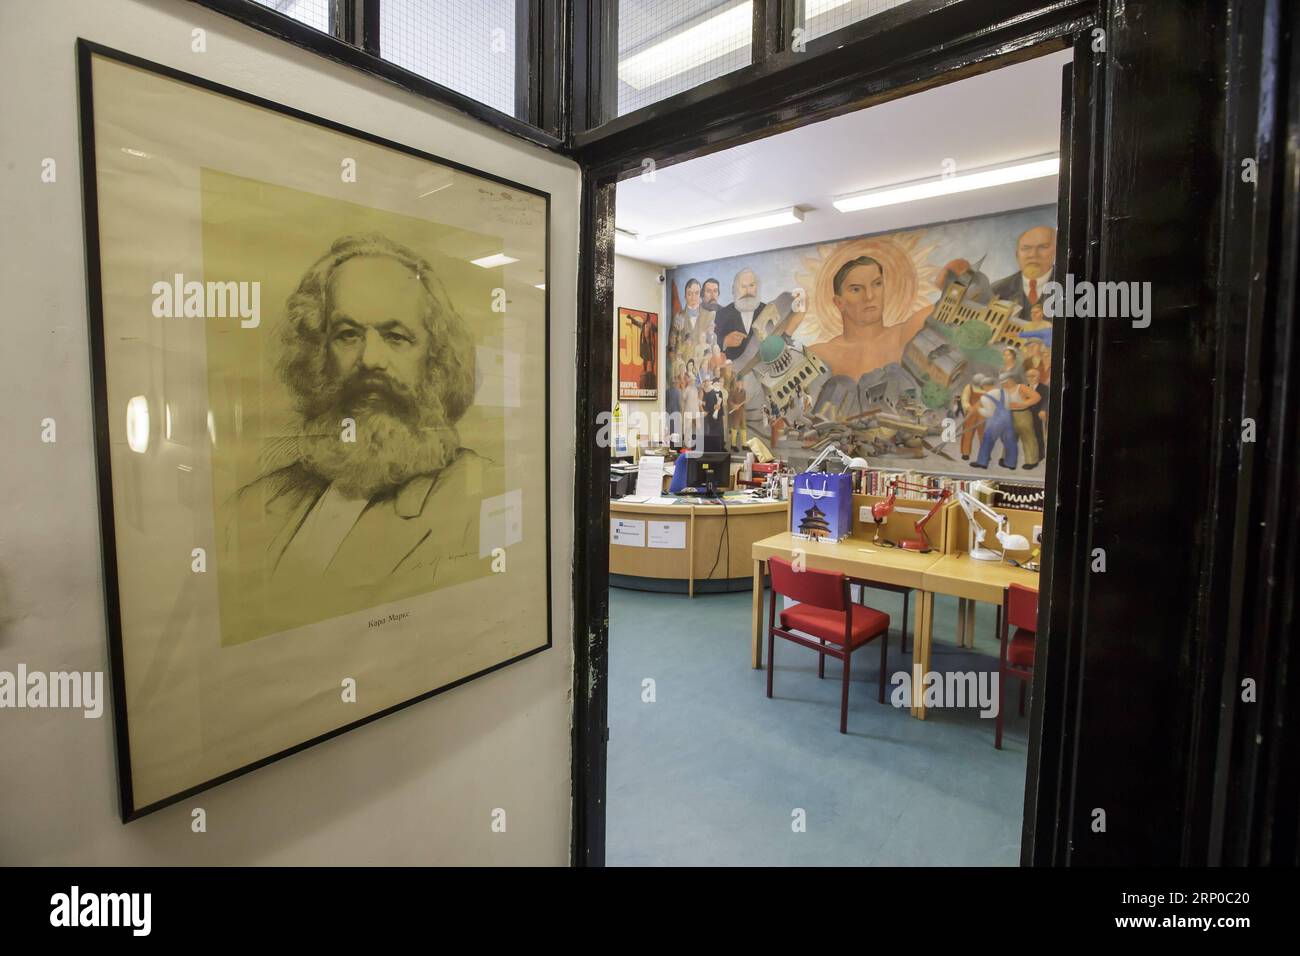 (180504) -- LONDON, May 4, 2018 -- Photo taken on May 4, 2018 shows the reading room of the Marx Memorial Library and Workers School in London, Britain. Established in 1933 on the 50th anniversary of the death of Marx, the Marx Memorial Library and Workers School has been the intellectual home of generations of scholars interested in studying Marxism, trade unionism, and the working class movement. ) BRITAIN-LONDON-MARX MEMORIAL LIBRARY AND WORKERS SCHOOL TimxIreland PUBLICATIONxNOTxINxCHN Stock Photo